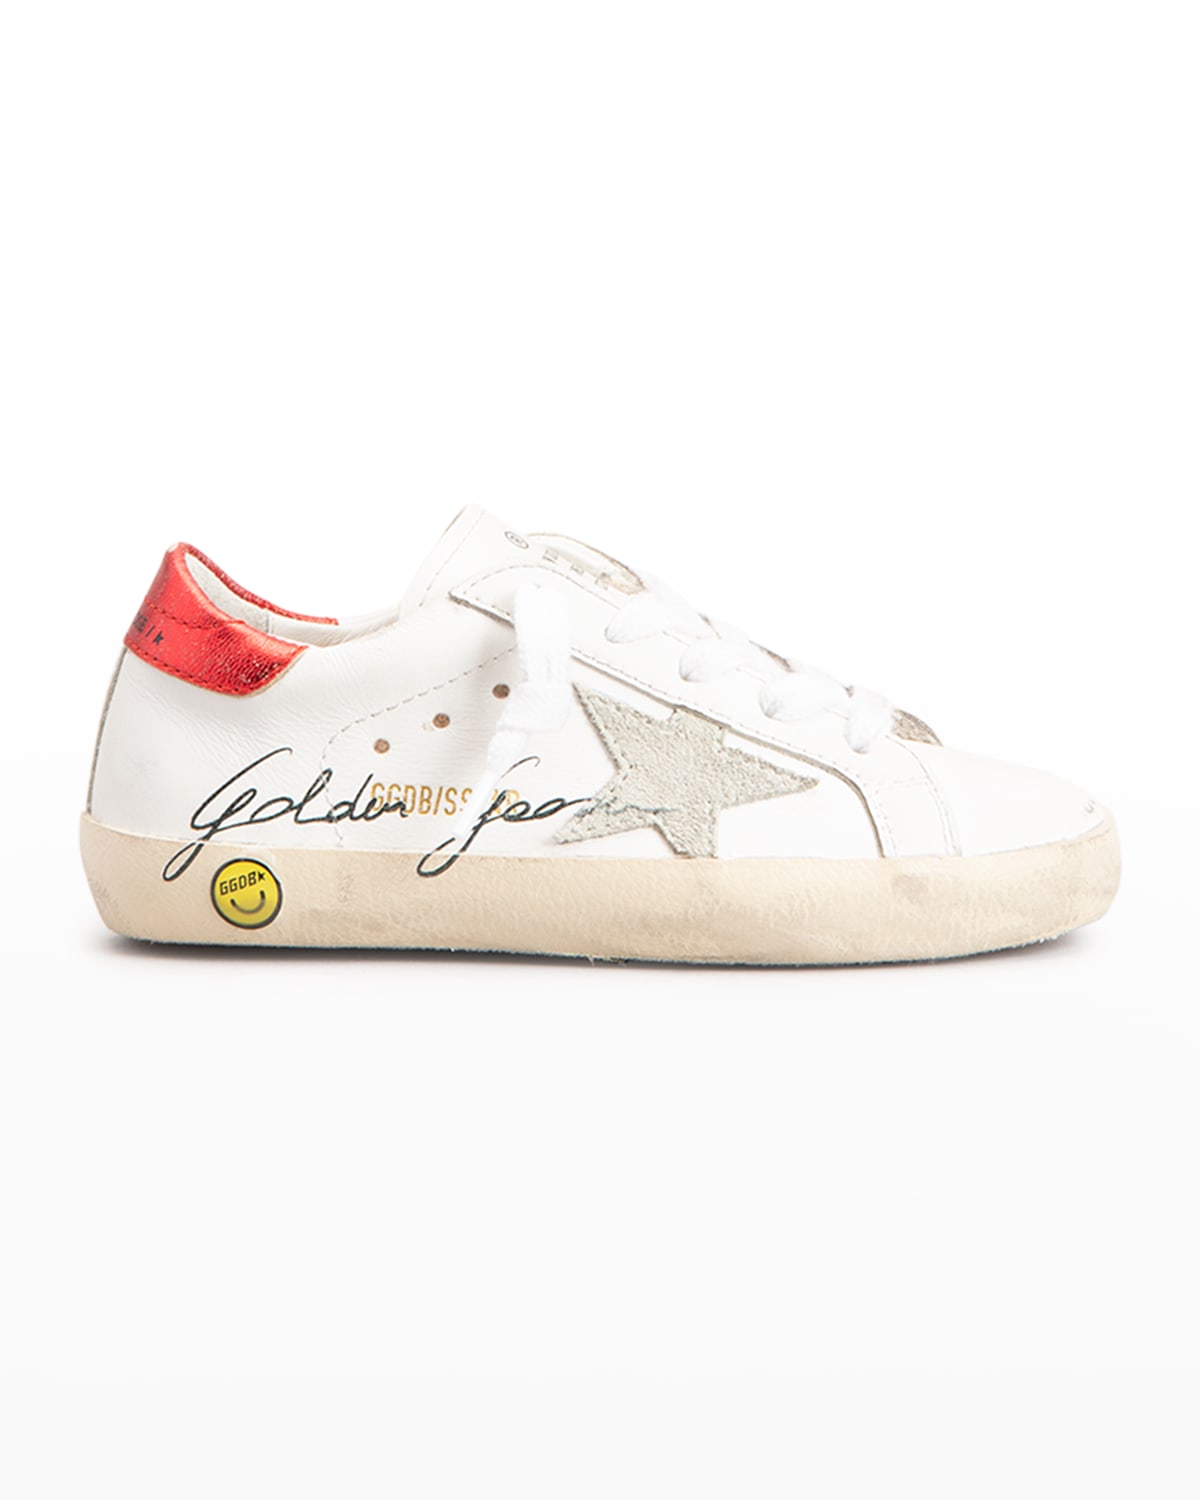 Golden Goose Girl's Super Star Suede Sneakers, Toddlers/kids In White Ice/red/blk